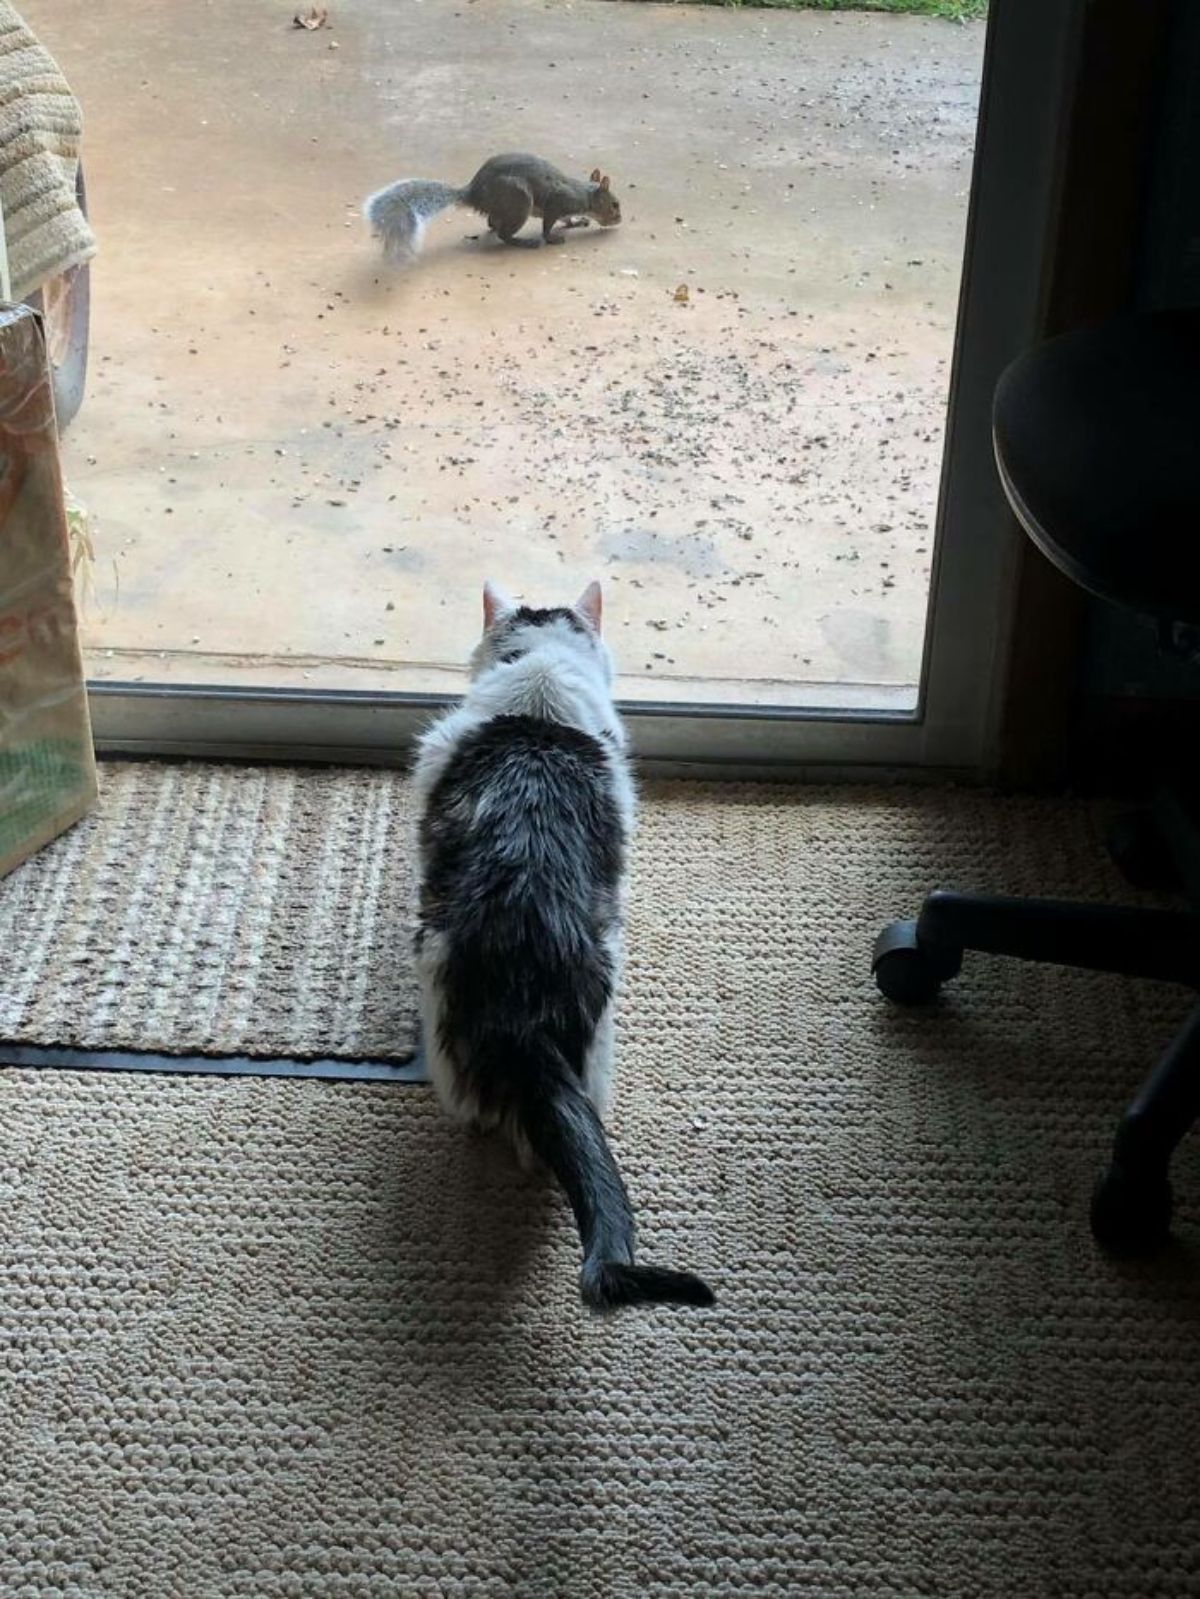 black and white cat standing on a brown rug watching a squirrel eating